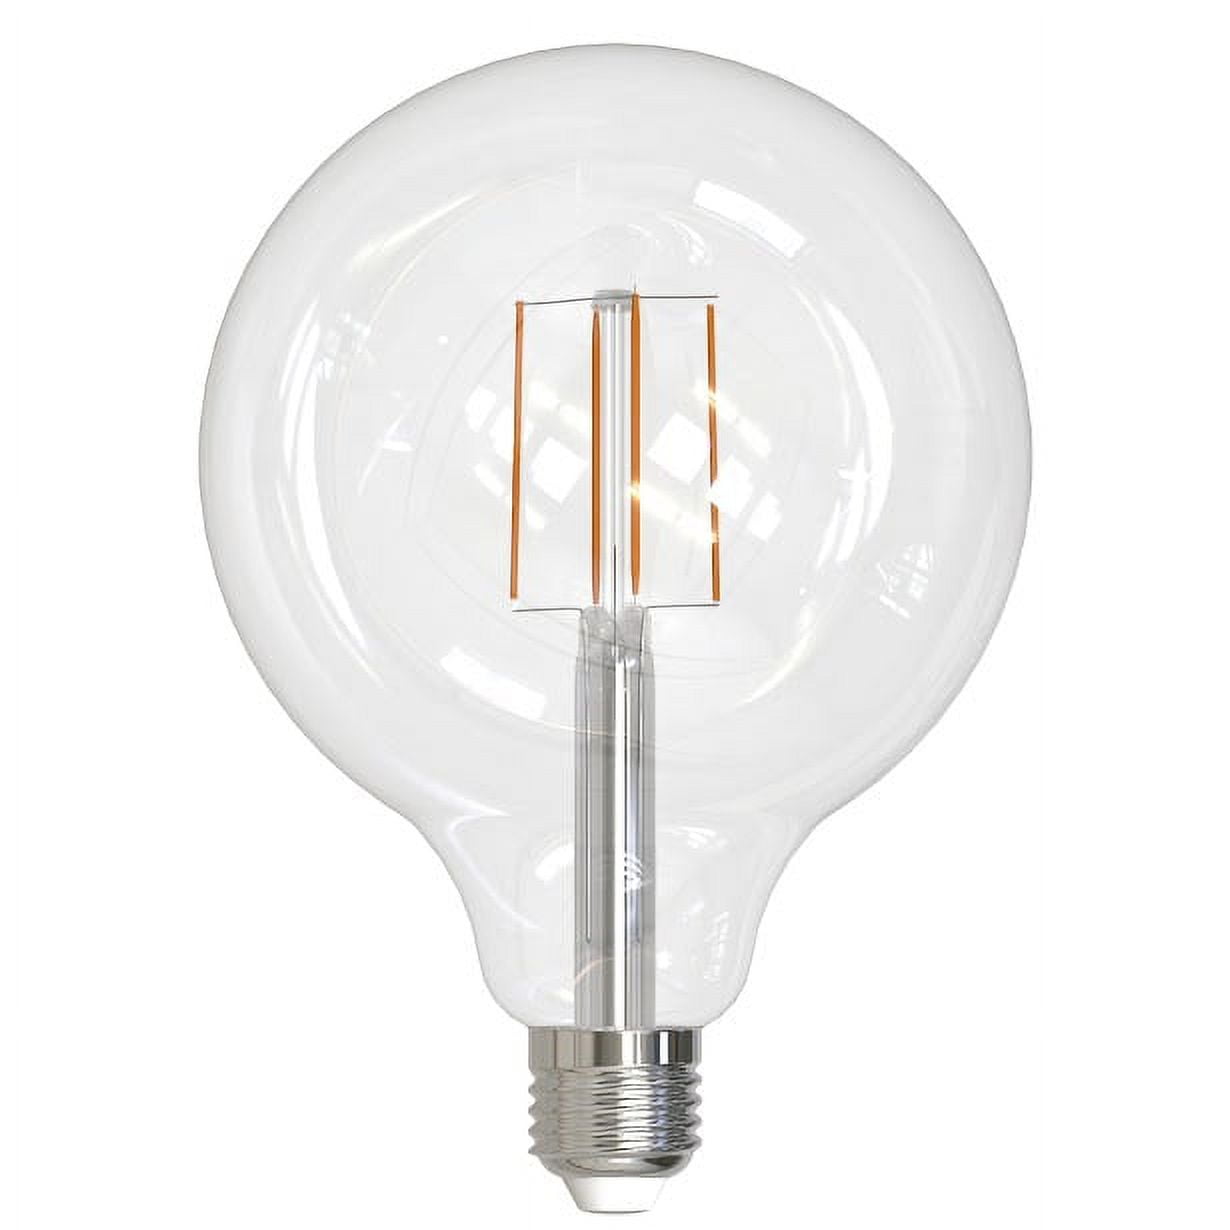 Picture of Bulbrite Pack of (2) 8.5 Watt Dimmable Clear Filament G40 Medium (E26) LED Bulb - 800 Lumens  3000K  and 90 CRI